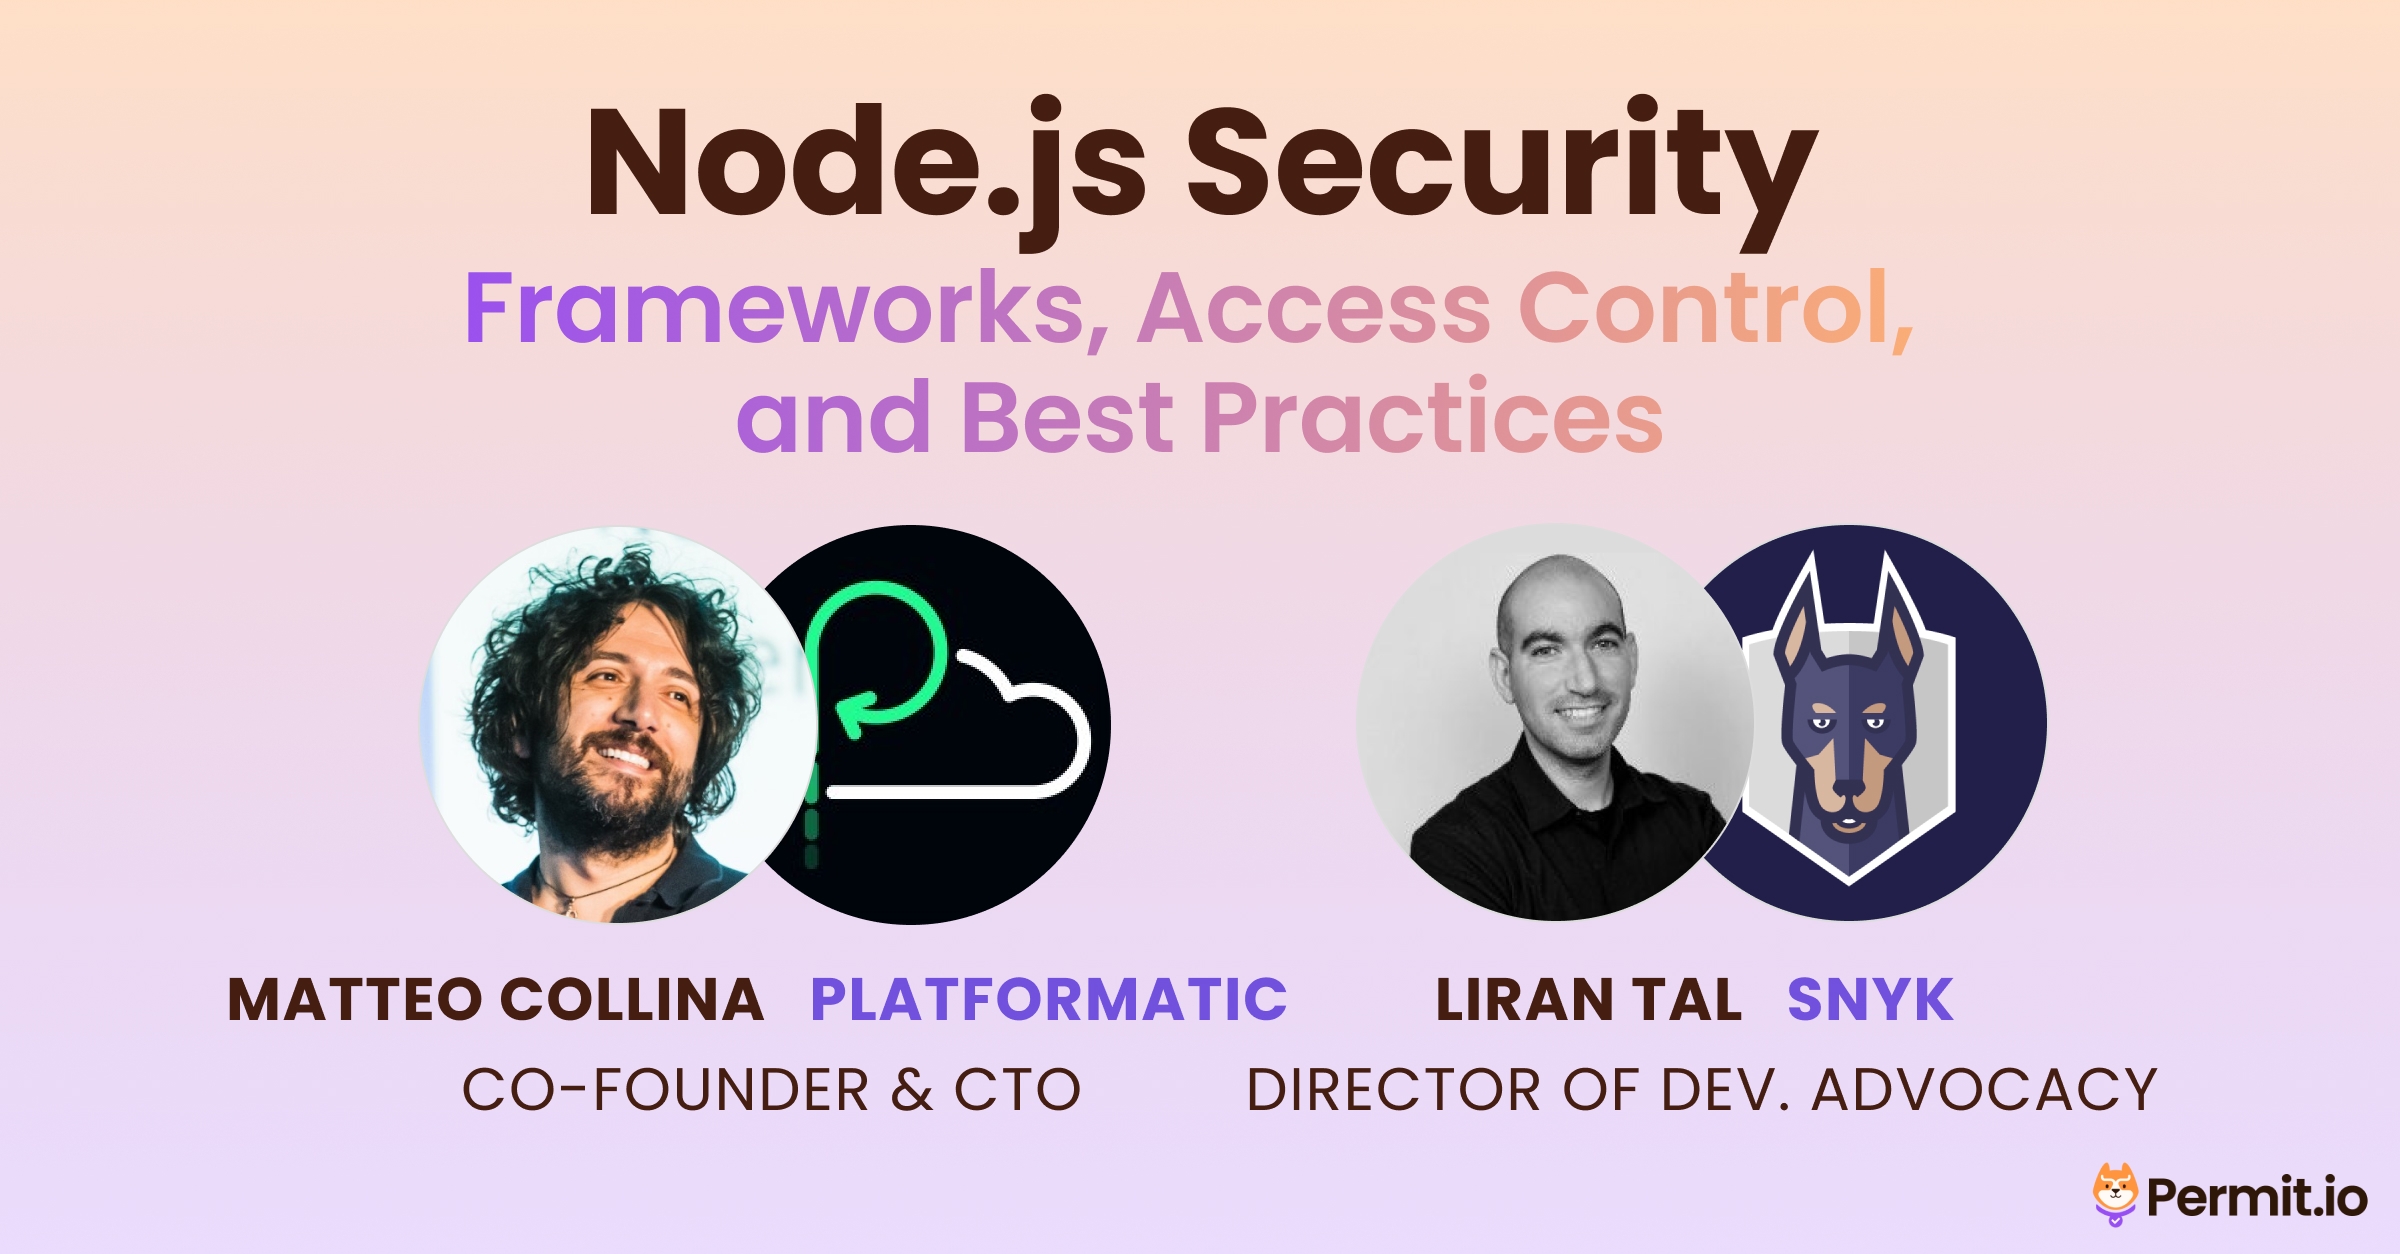 Uncover Node.js security with Matteo Collina (Co-Founder & CTO @Platformatic) and Liran Tal (Director of dev. advocacy @Snyk)! Dive into access control, authorization, and security challenges in Node.js frameworks. Learn why decorators and middleware aren't enough and discover best practices from experts